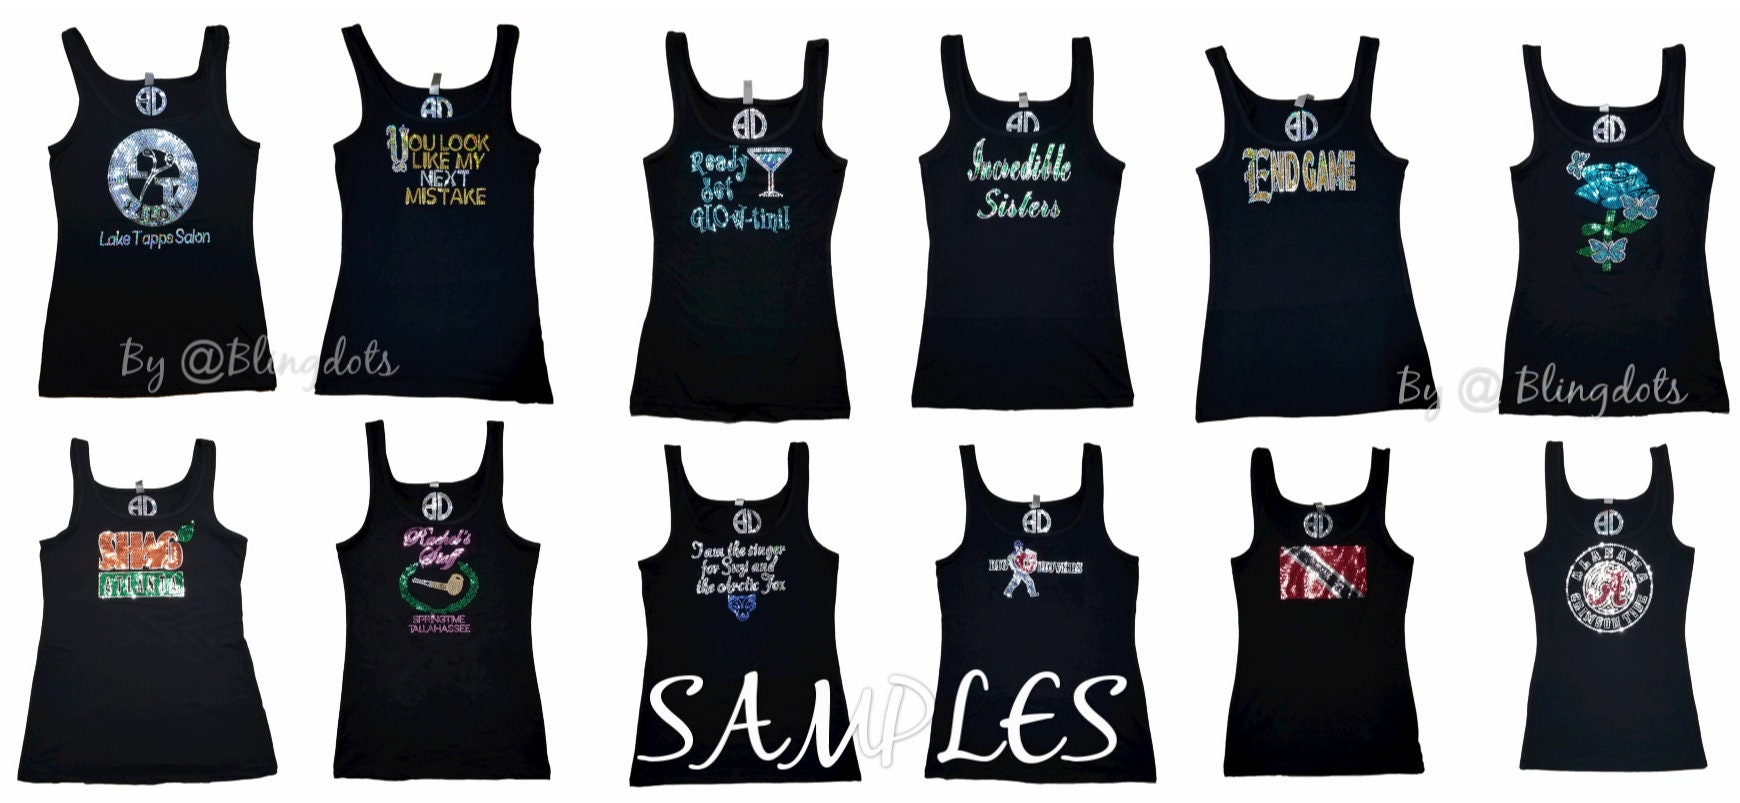 Custom Personalized Bling Logo shirt tank top Sequins Logo Glitter made in Usa fast shipping